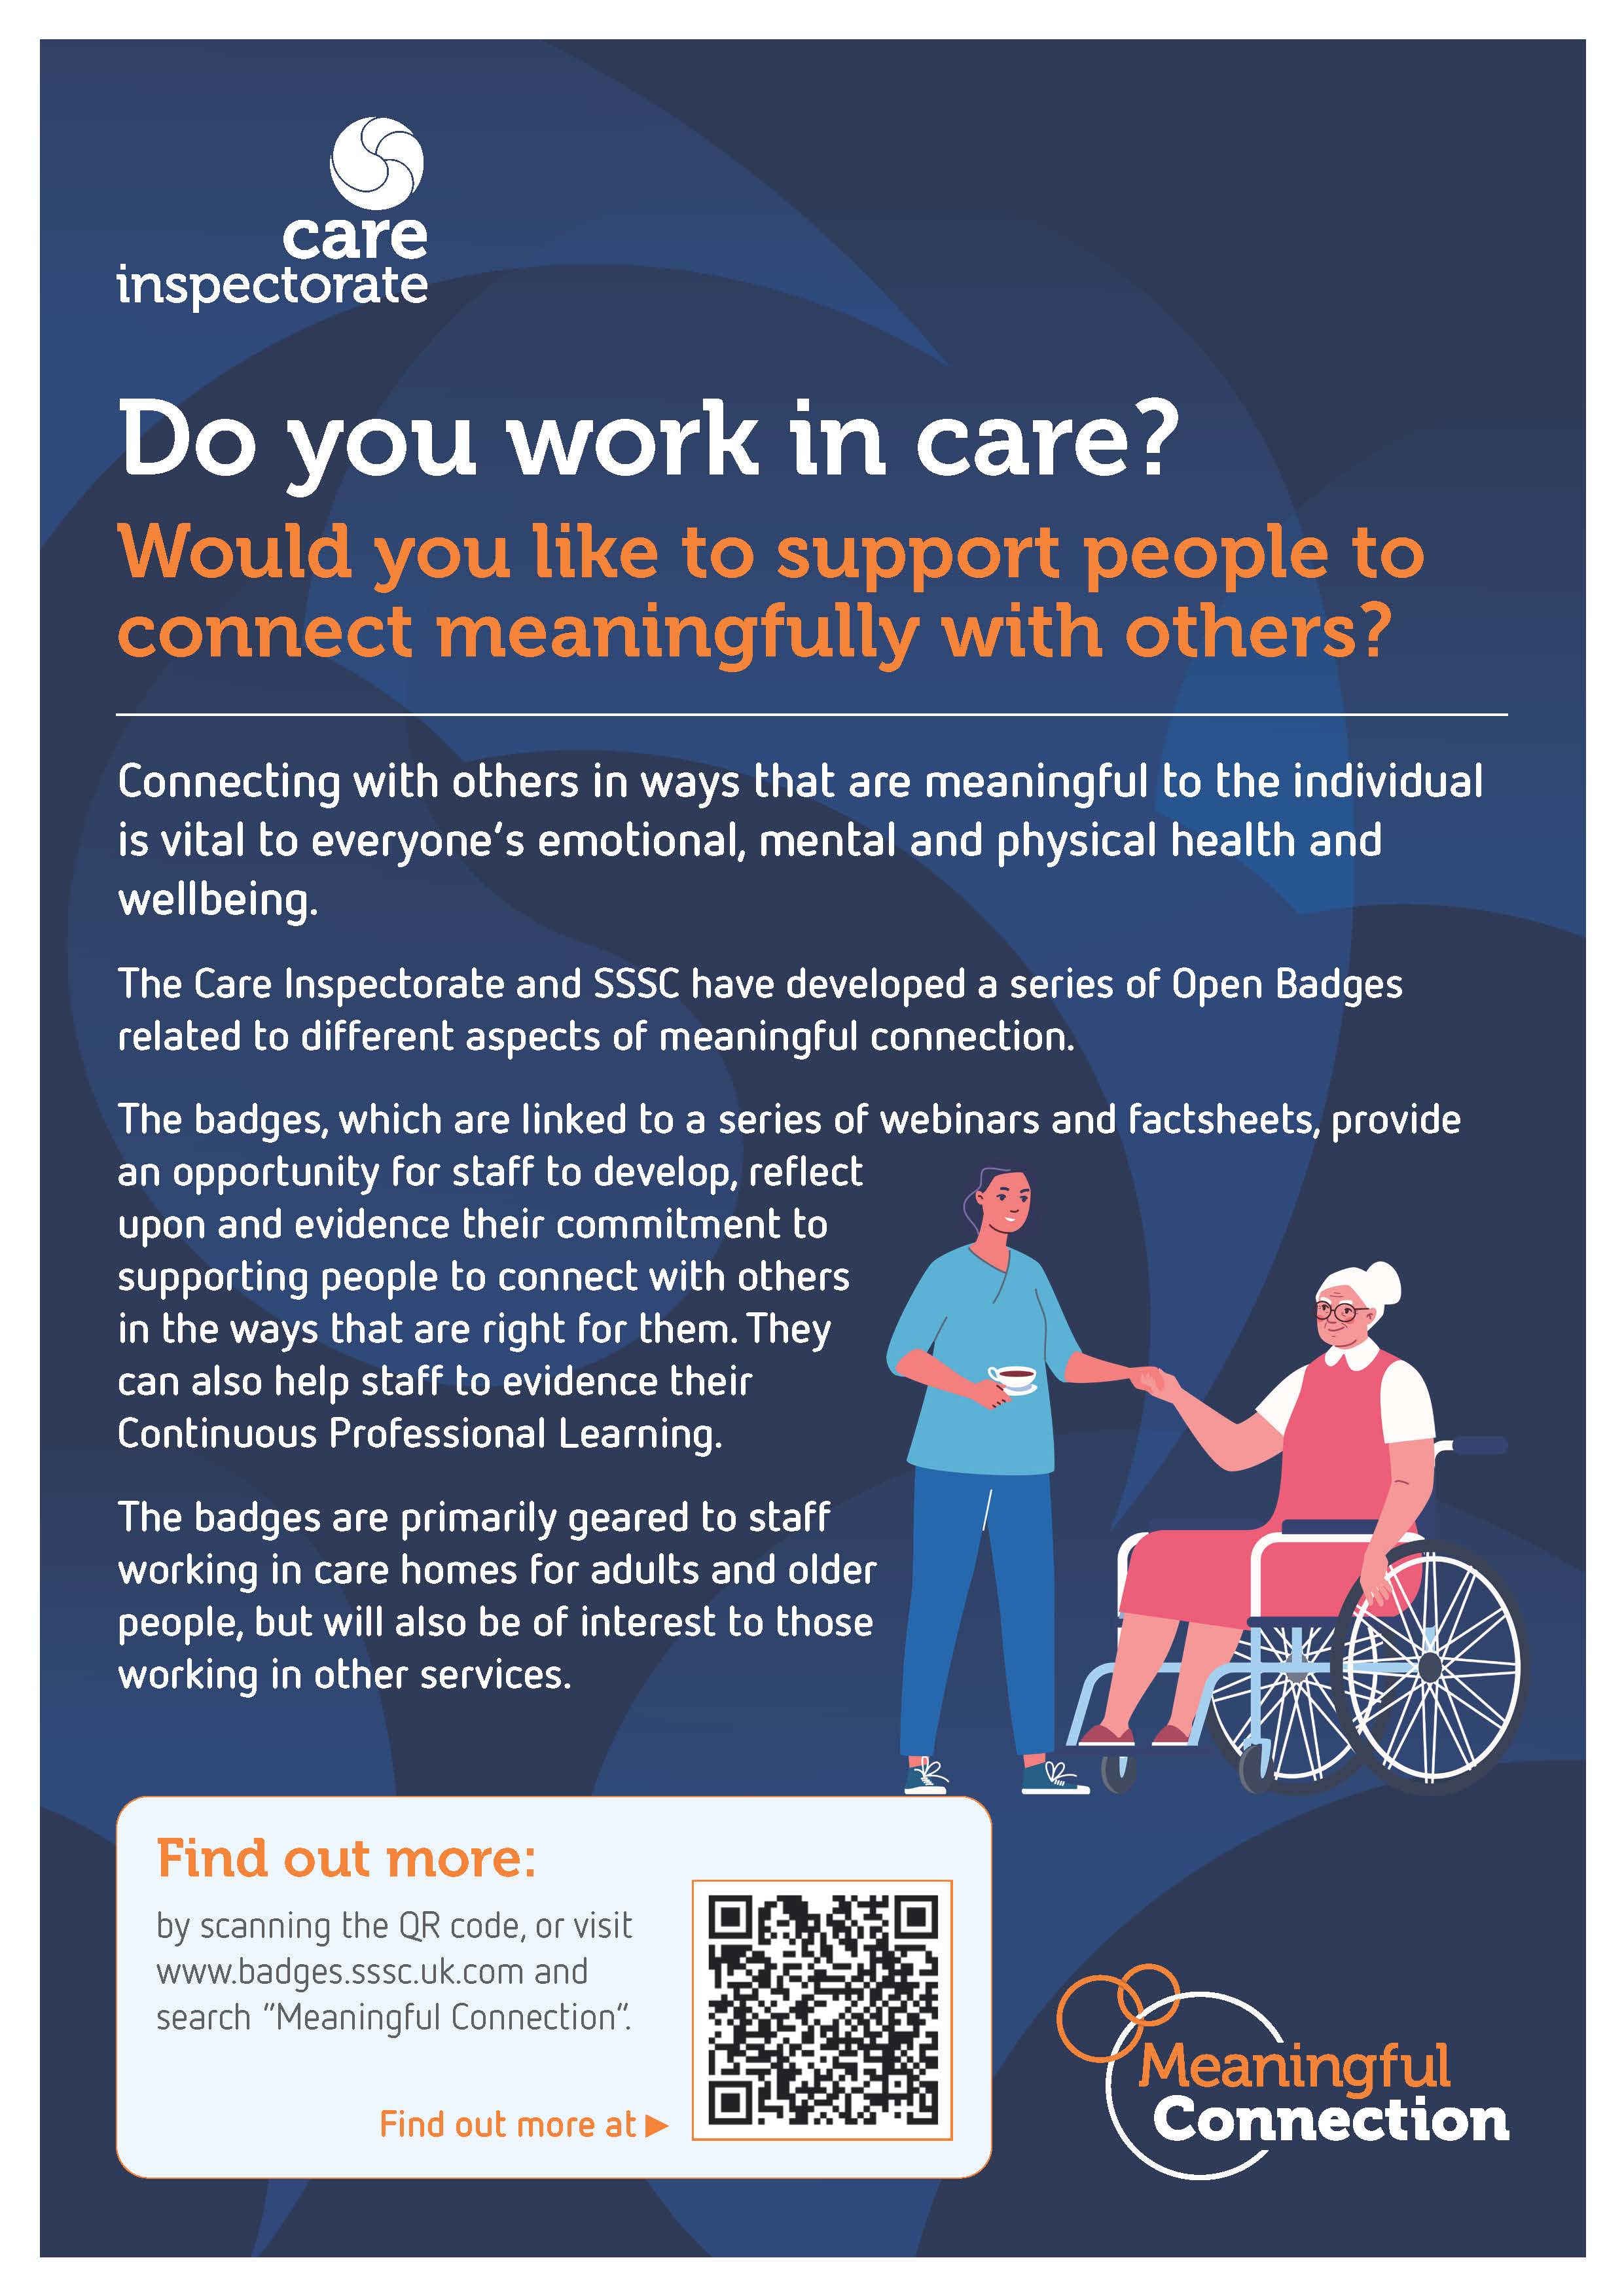 Do you work in care poster